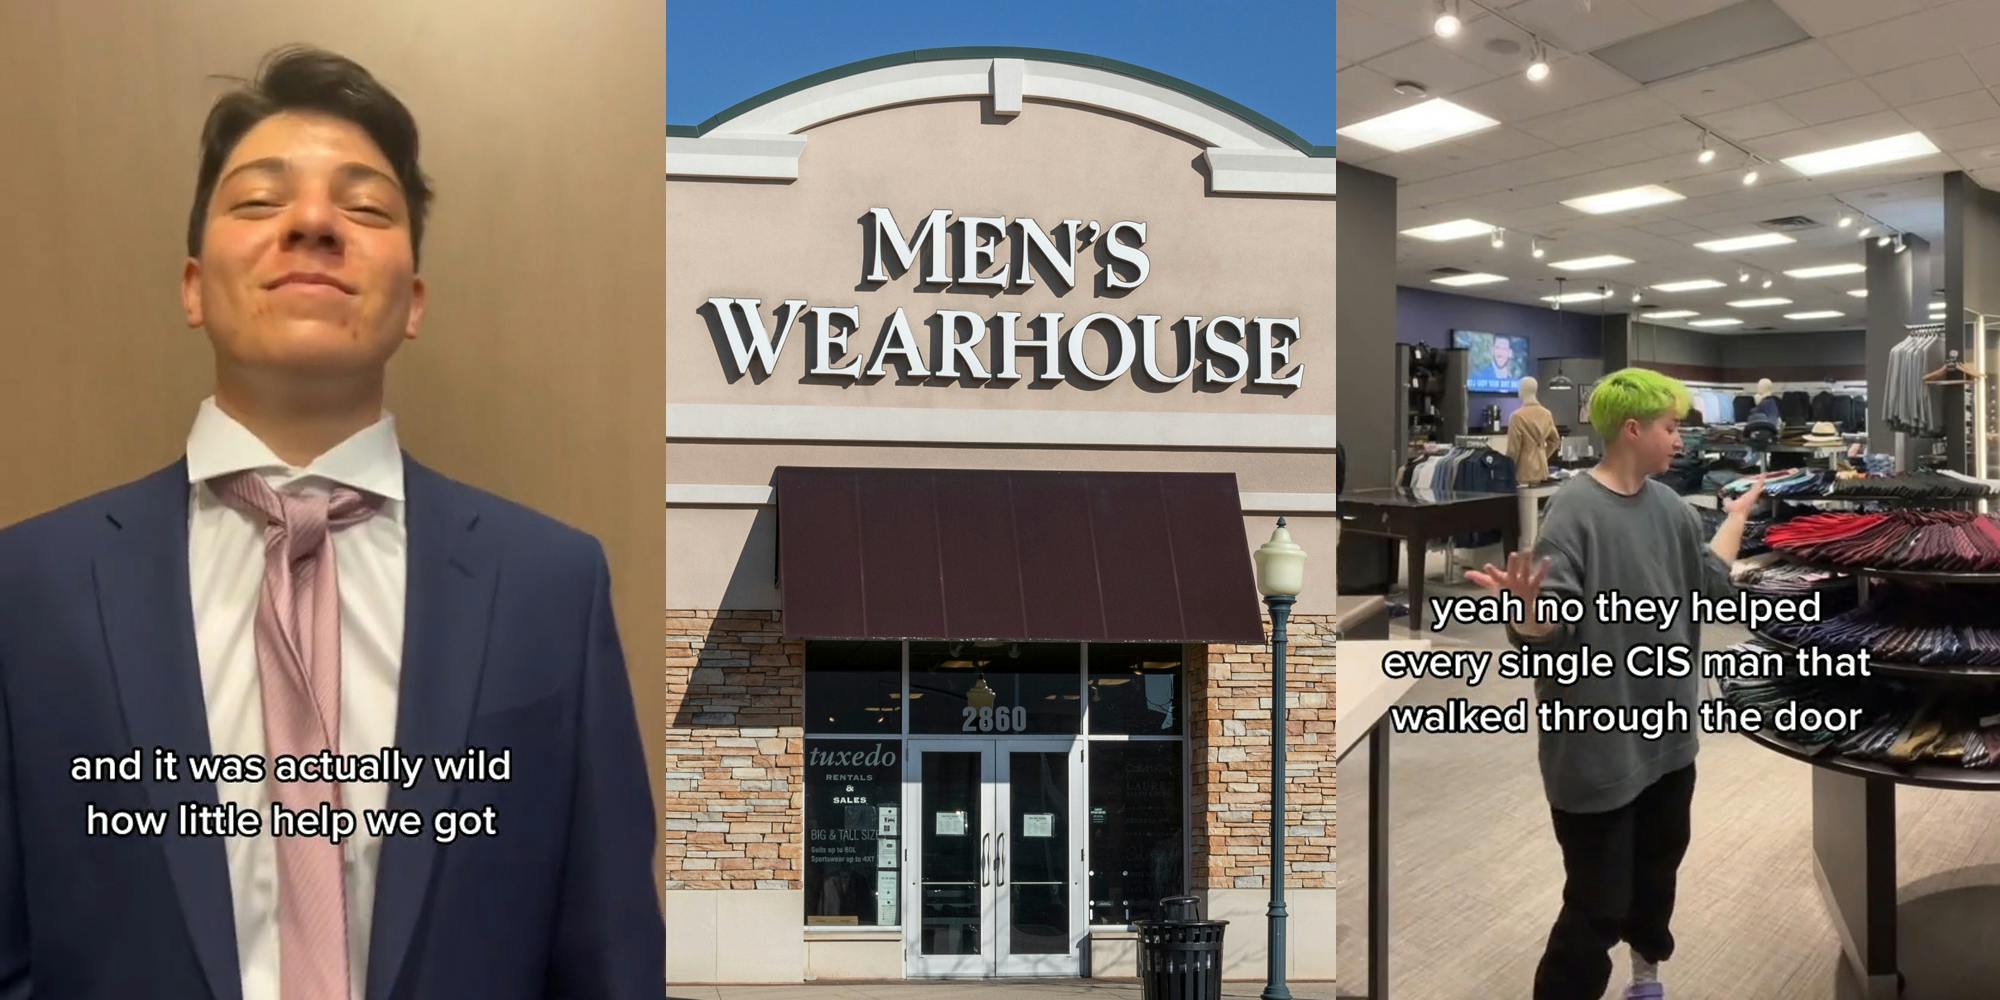 Men's Warehouse customer with caption "and it was actually wild how little help we got" (l) Men's Warehouse sign on building (c) Men's Warehouse customer with caption "yeah no they helped every CIS man that walked through the door" (r)